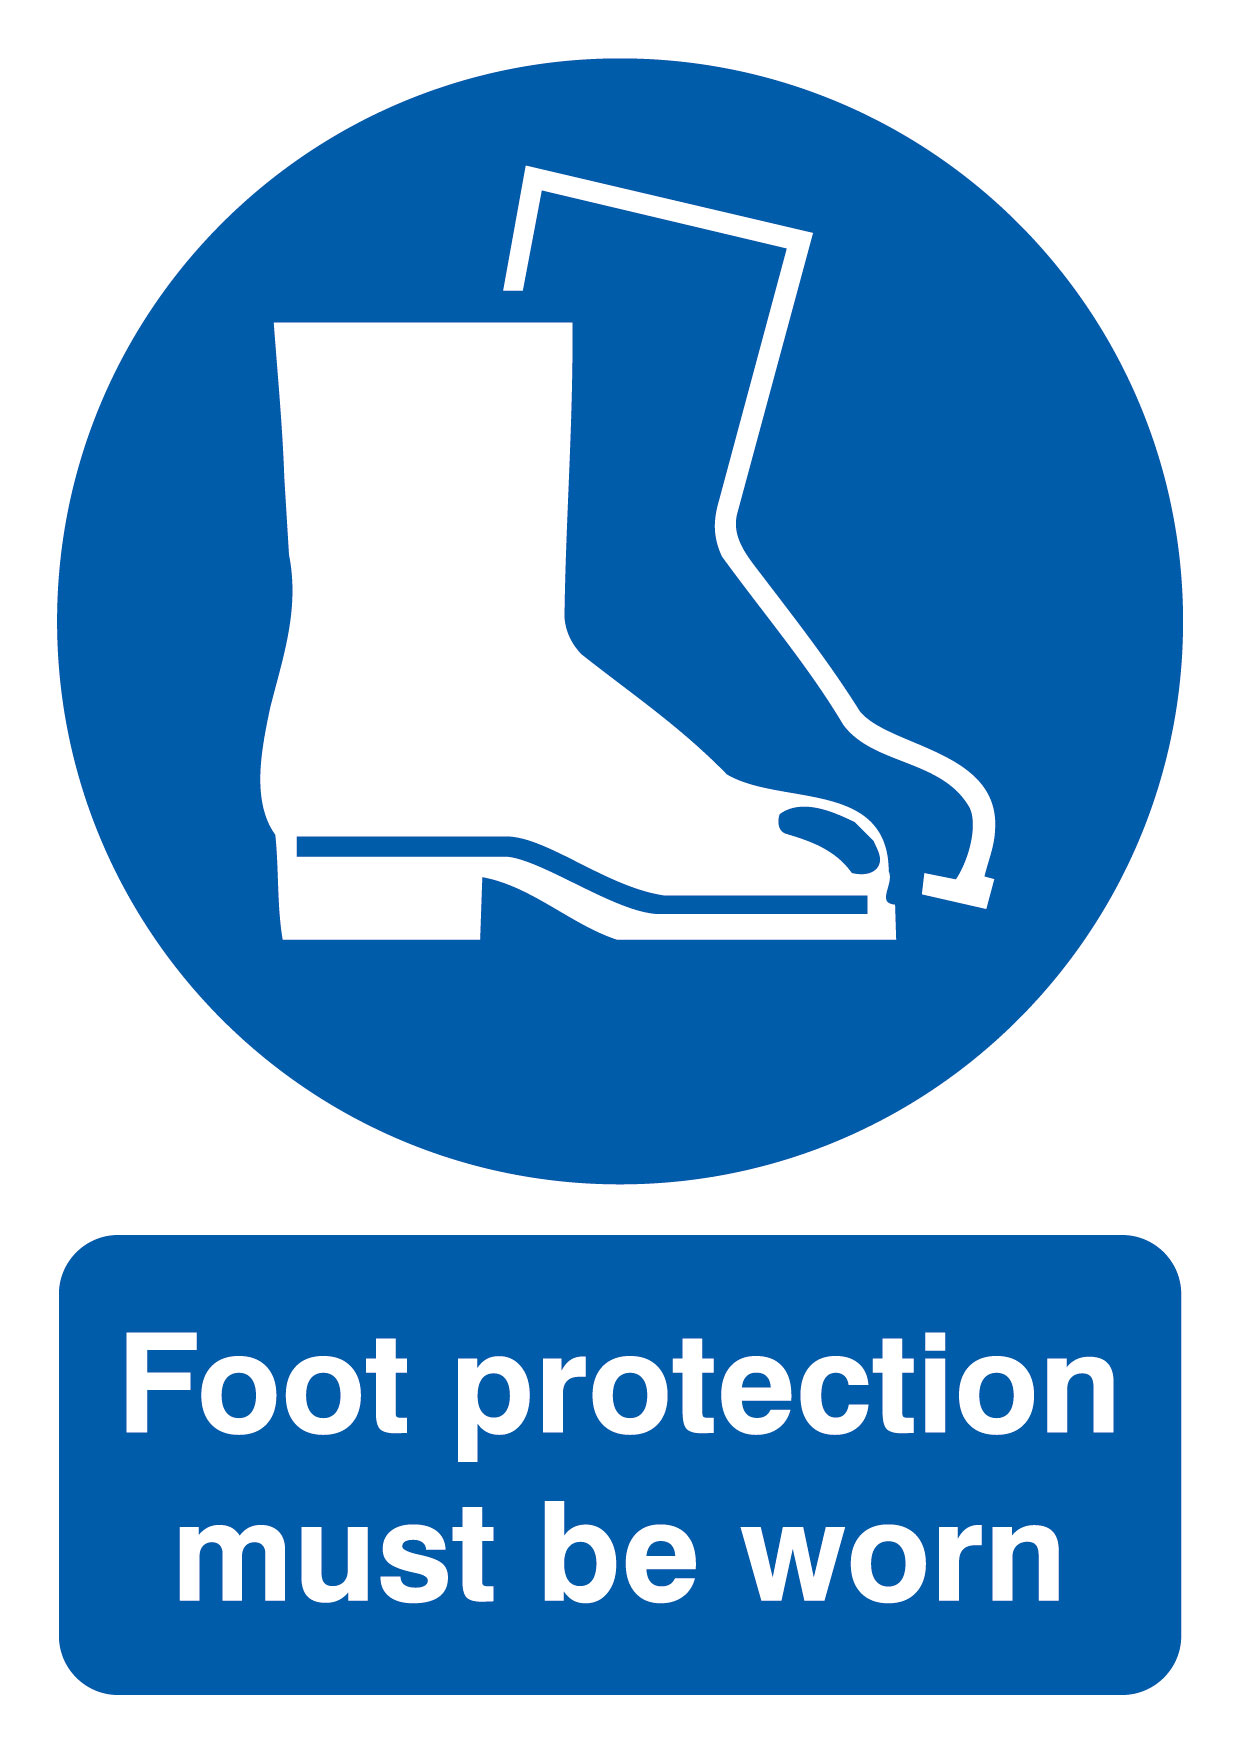 400 x 300 Foot protection must be worn 1.2mm rigid polypropylene sign